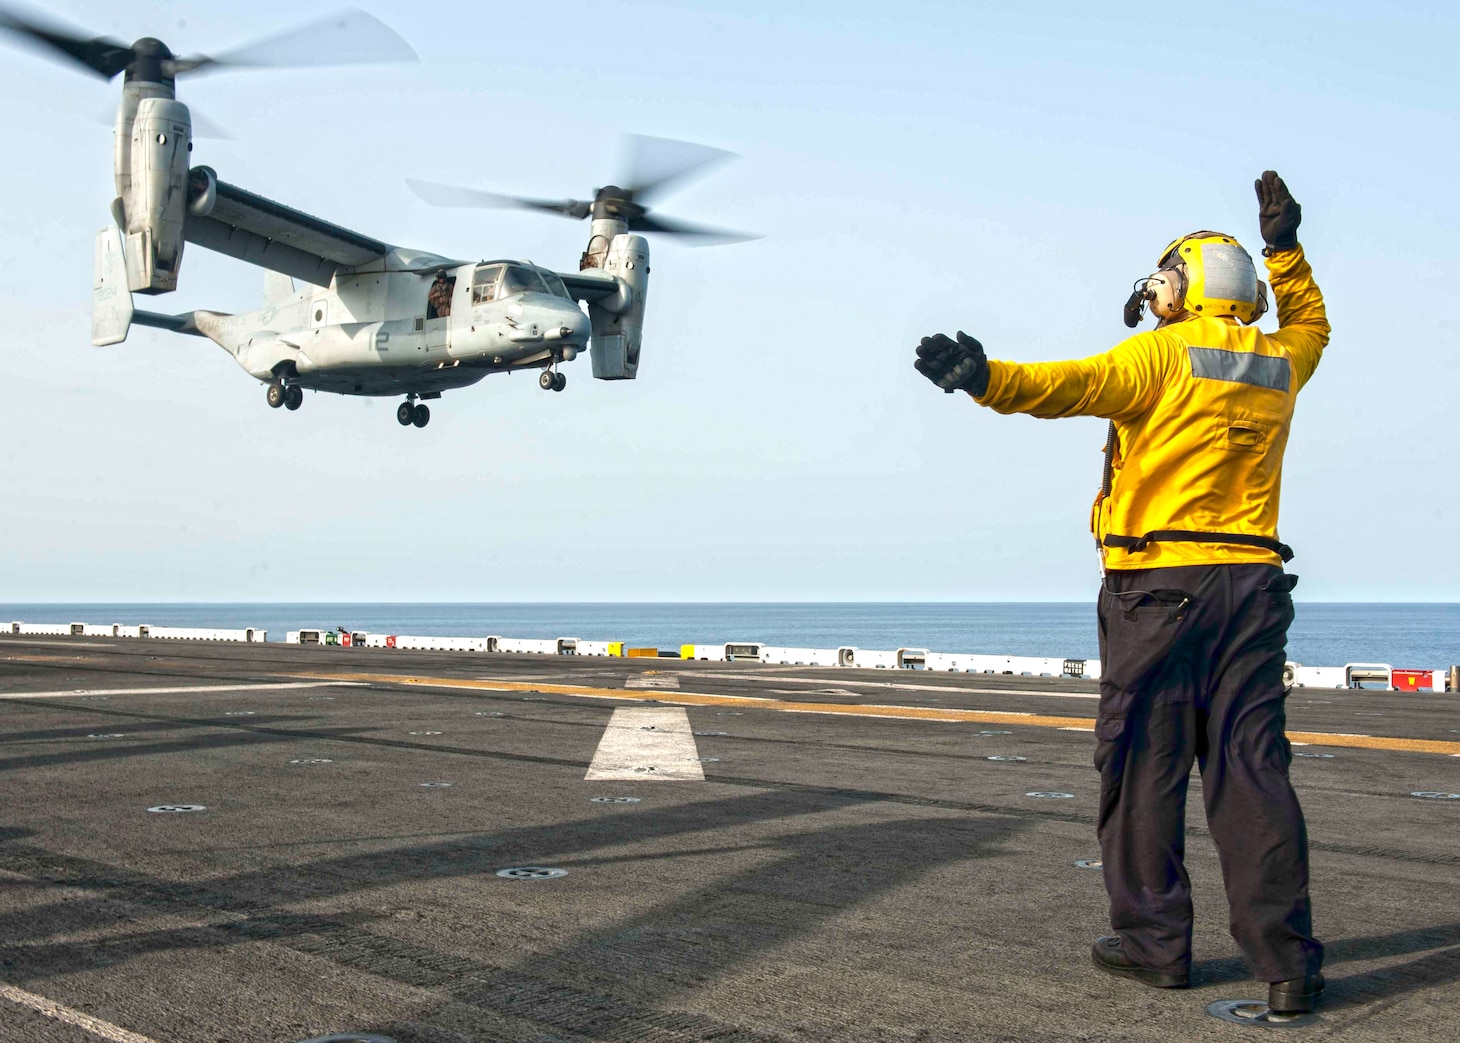 Aviation Boatswain’s Mate (Handling) Airman Fernando Portugal signals to the pilot of an MV-22 Osprey, assigned to Marine Medium Tiltrotor Squadron (VMM) 166 (Reinforced), as it prepares to land on the flight deck of amphibious assault ship USS Boxer (LHD 4). Boxer is the flagship for the Boxer Amphibious Ready Group and, with the embarked 13th Marine Expeditionary Unit, is deployed in support of maritime security operations and theater security cooperation efforts in the U.S. 5th Fleet area of operations.